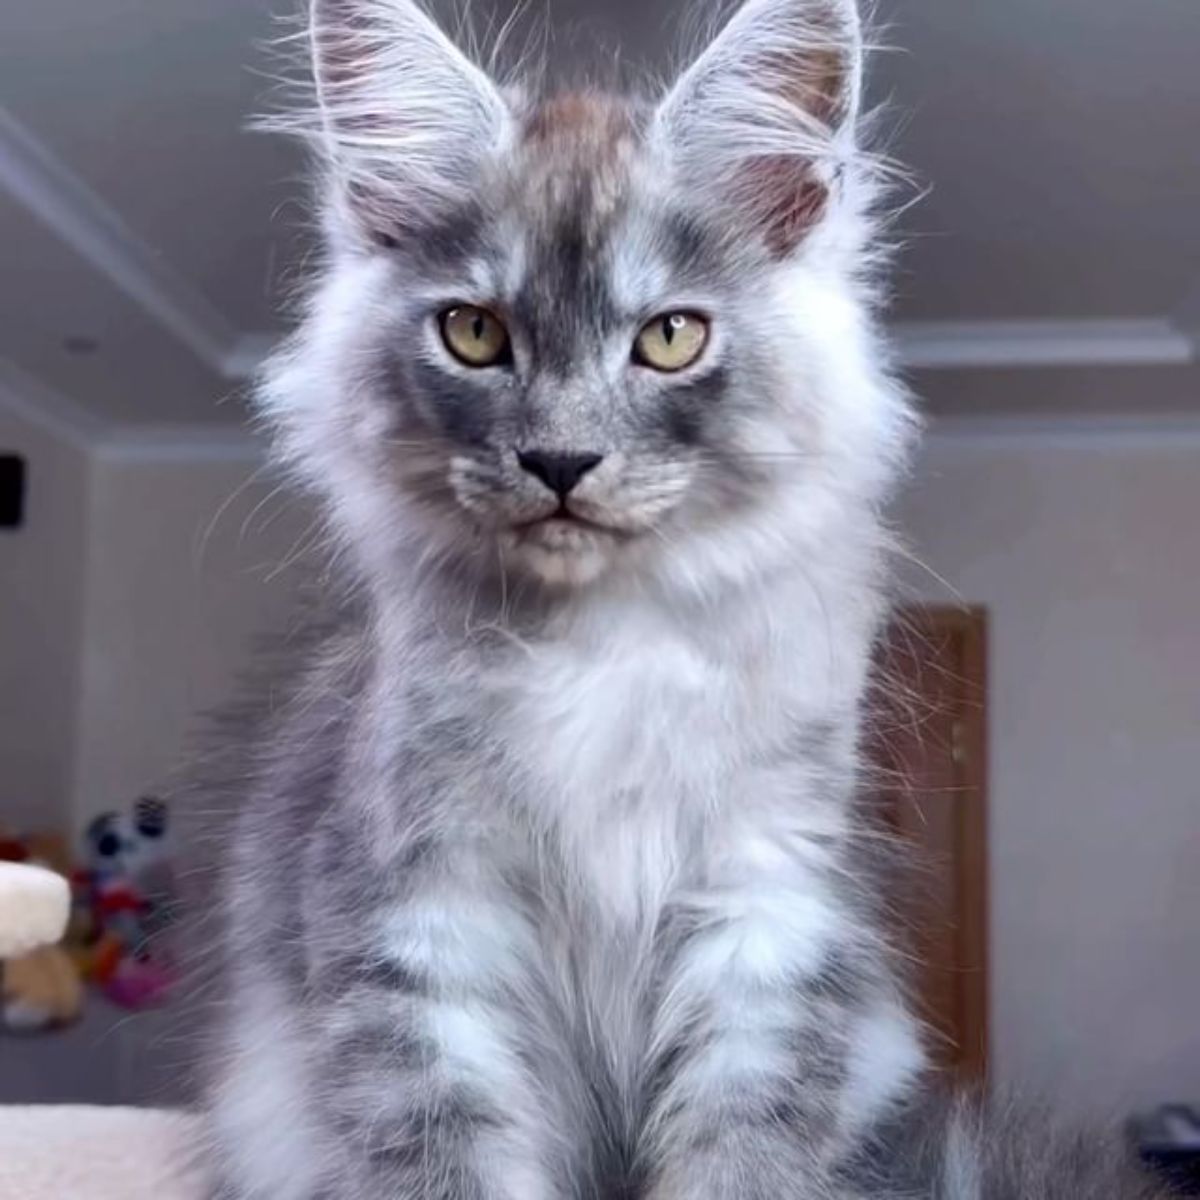 A fluffy gray maine coon looking into a camera lense.